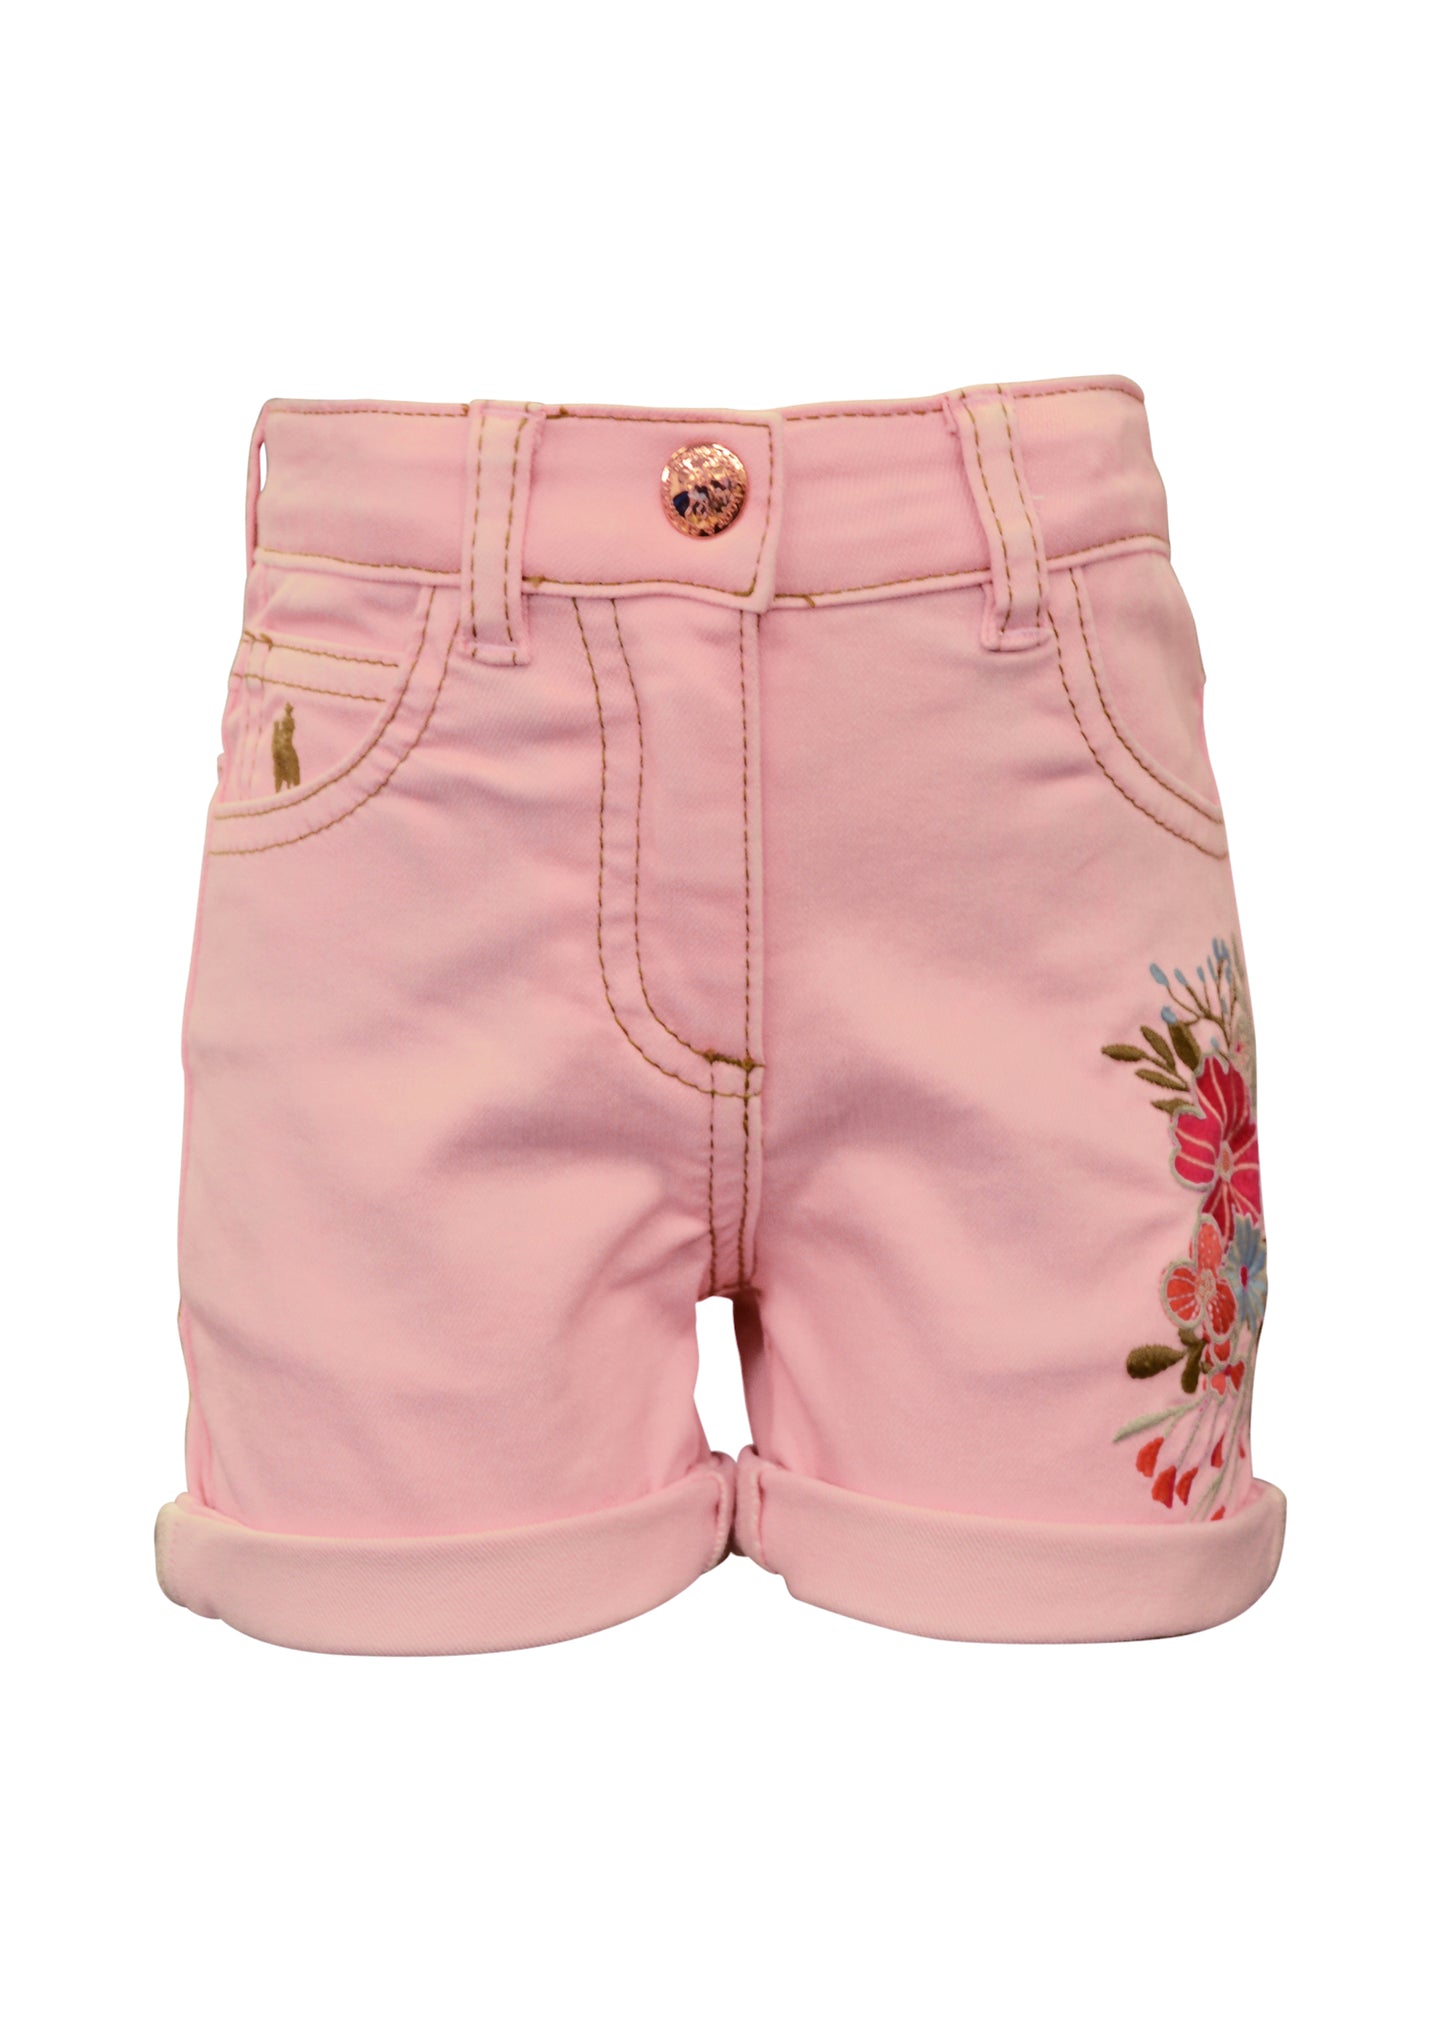 T1S5300072 Thomas Cook Girls Embroidered Denim Short Pink